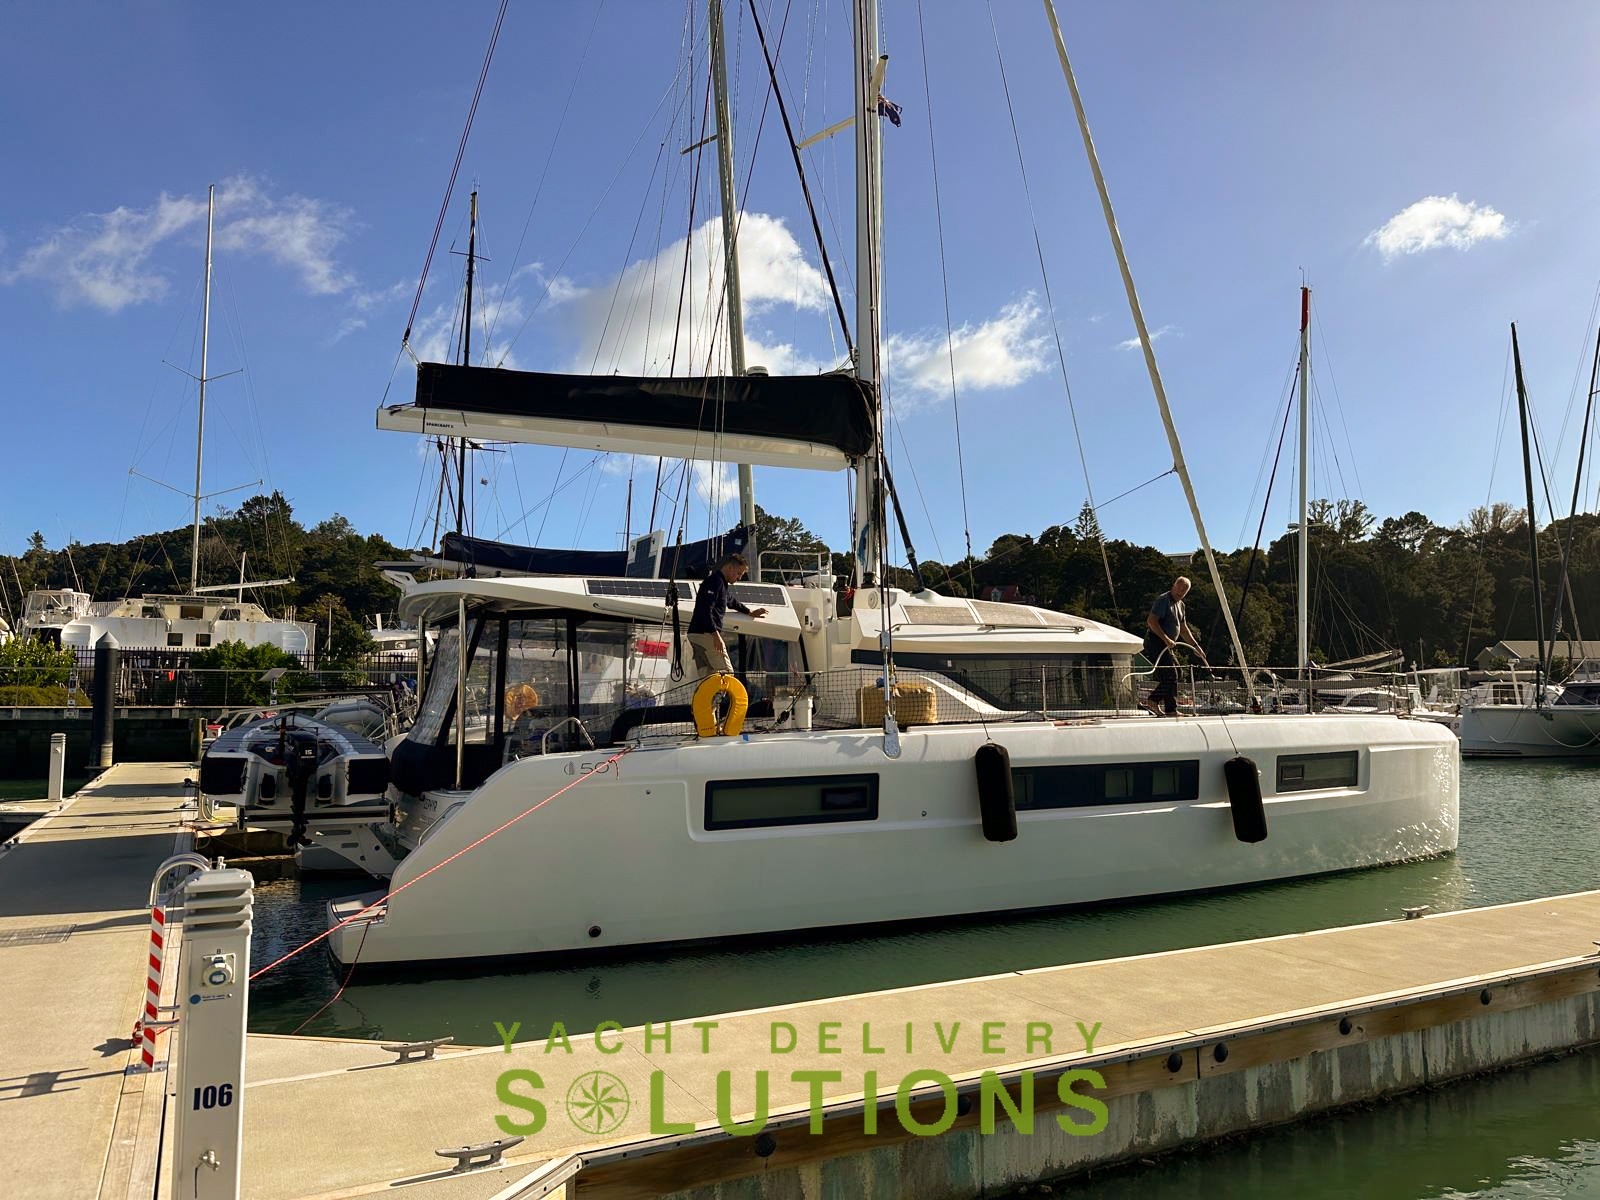 Lagoon 50 on the dock after being launched by yacht delivery solutions